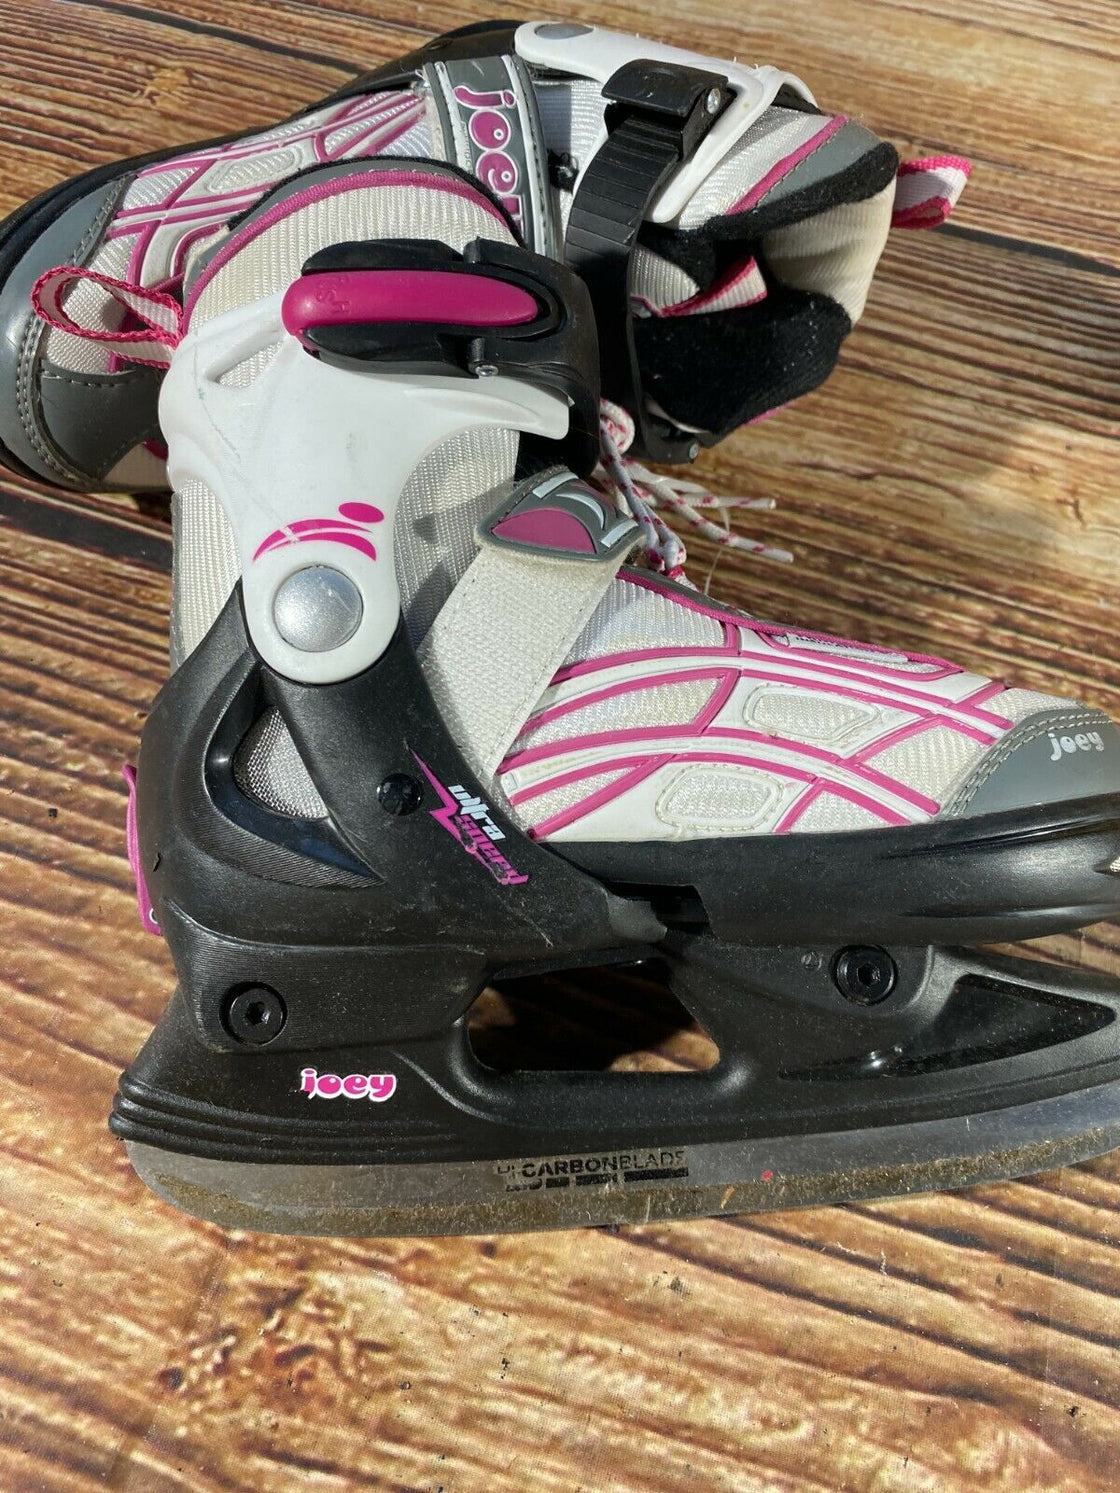 JOEY Ice Skates for Recreational Winter Sports Adjustable Kids / Youth EU29-32